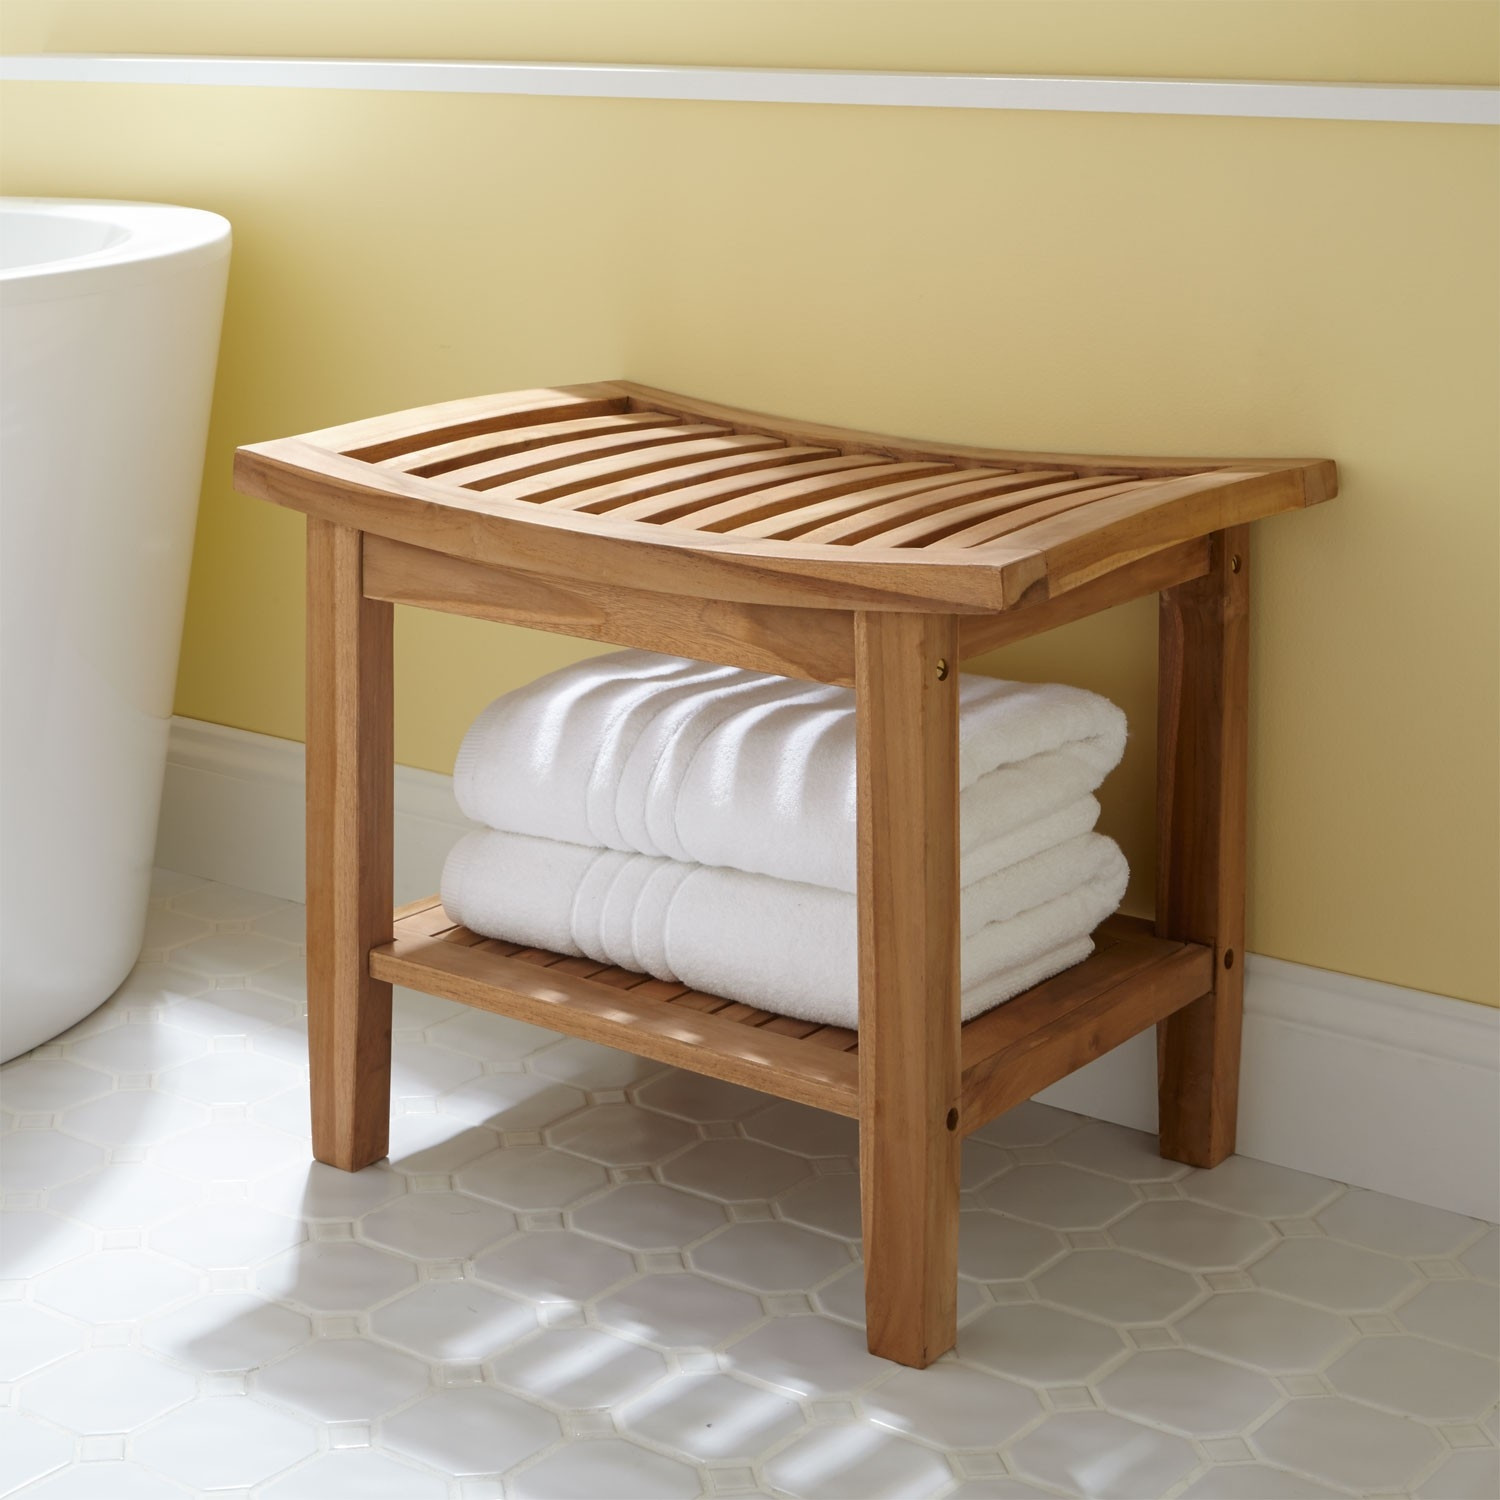 Small Bench for Bathroom Lovely Small Bathroom Storage Bench